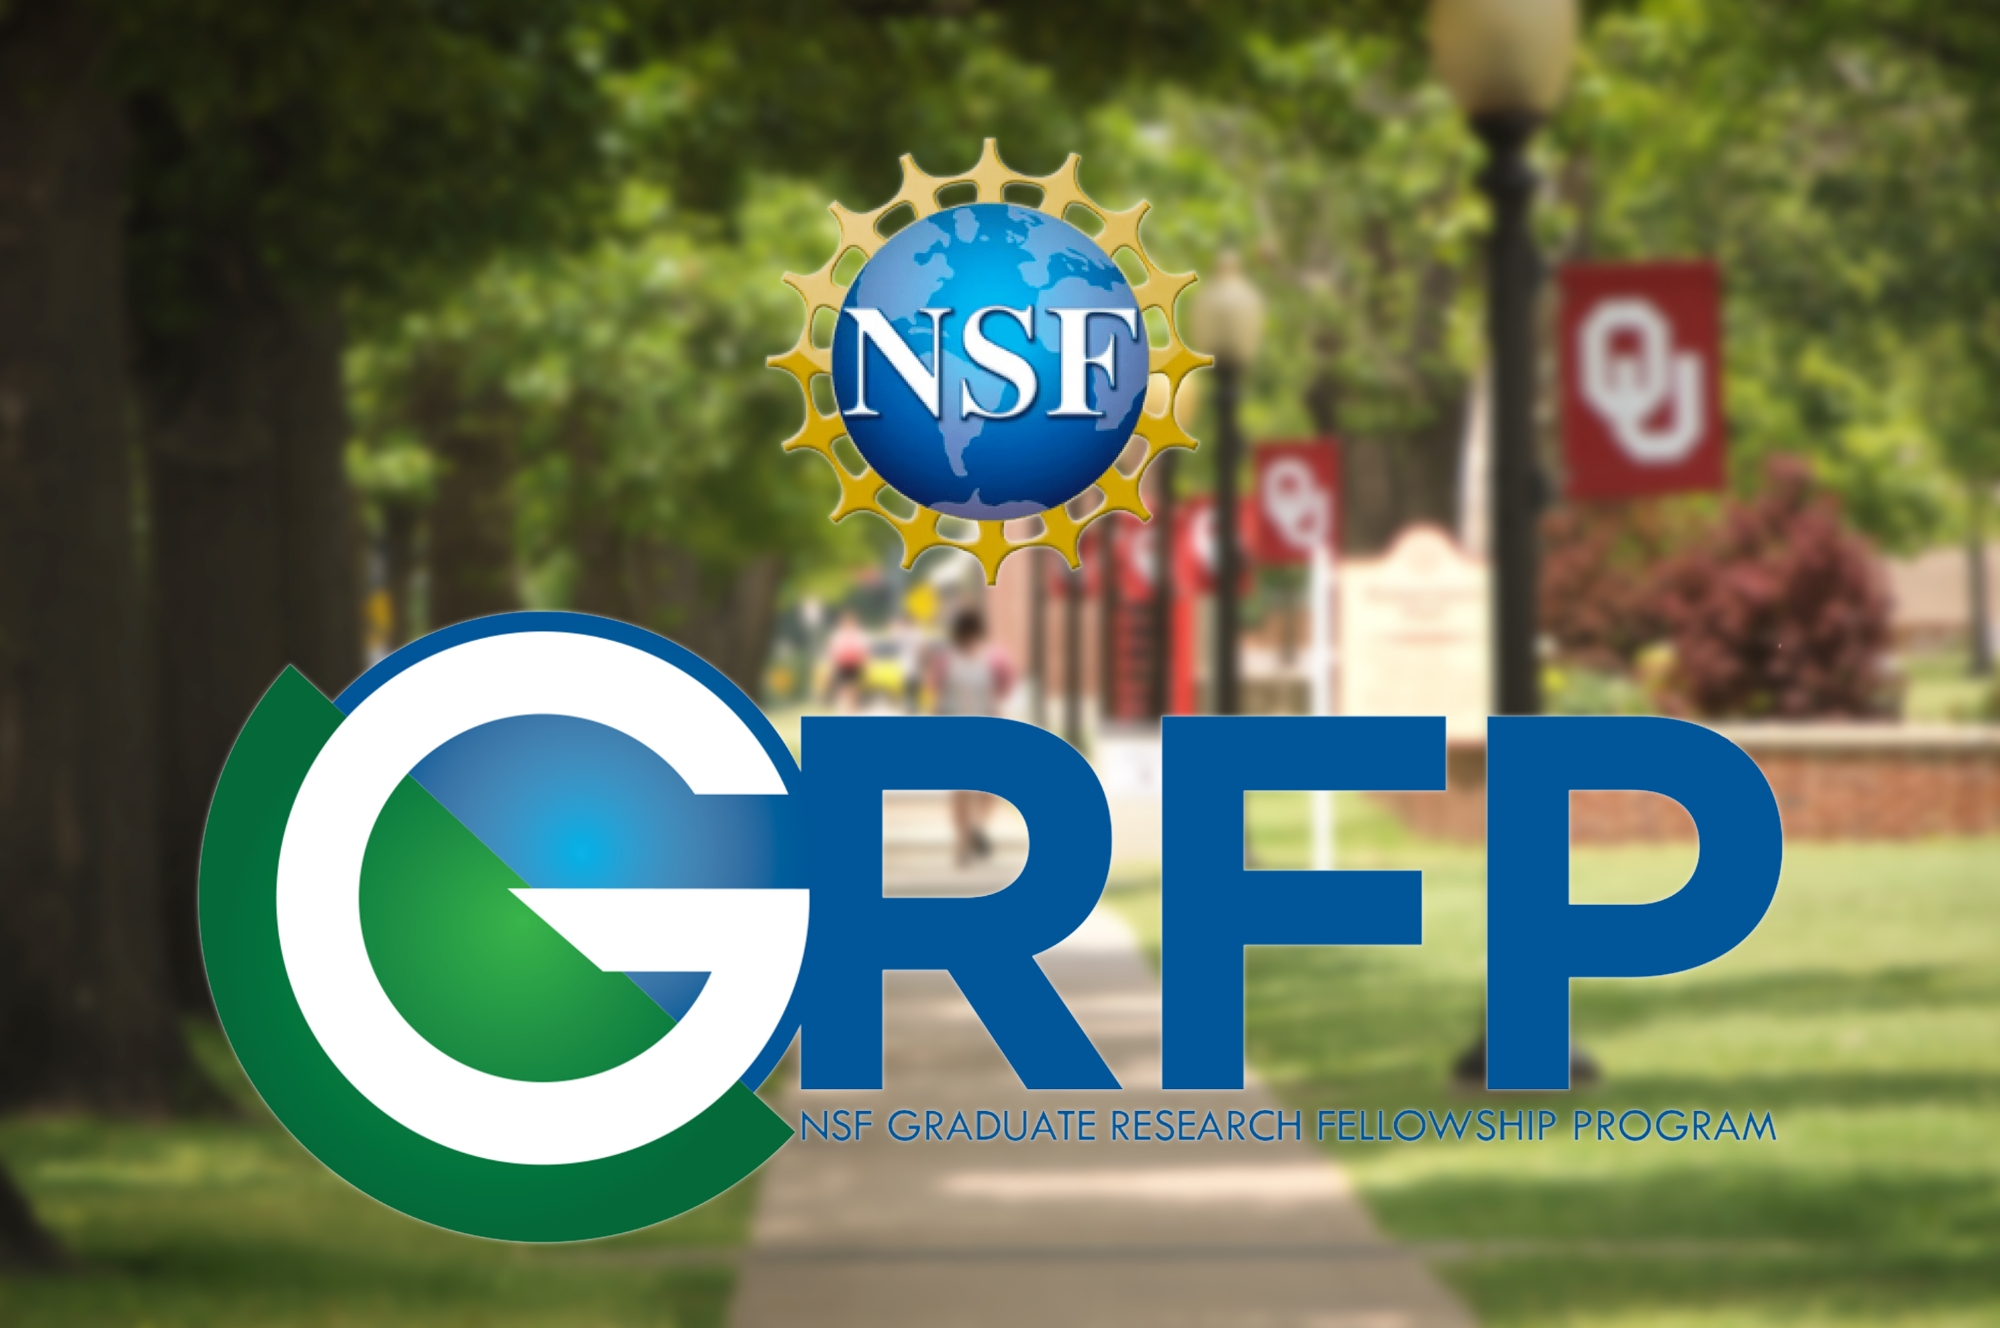 NSF logo and GRFP logo overlaid on a view on the OU campus